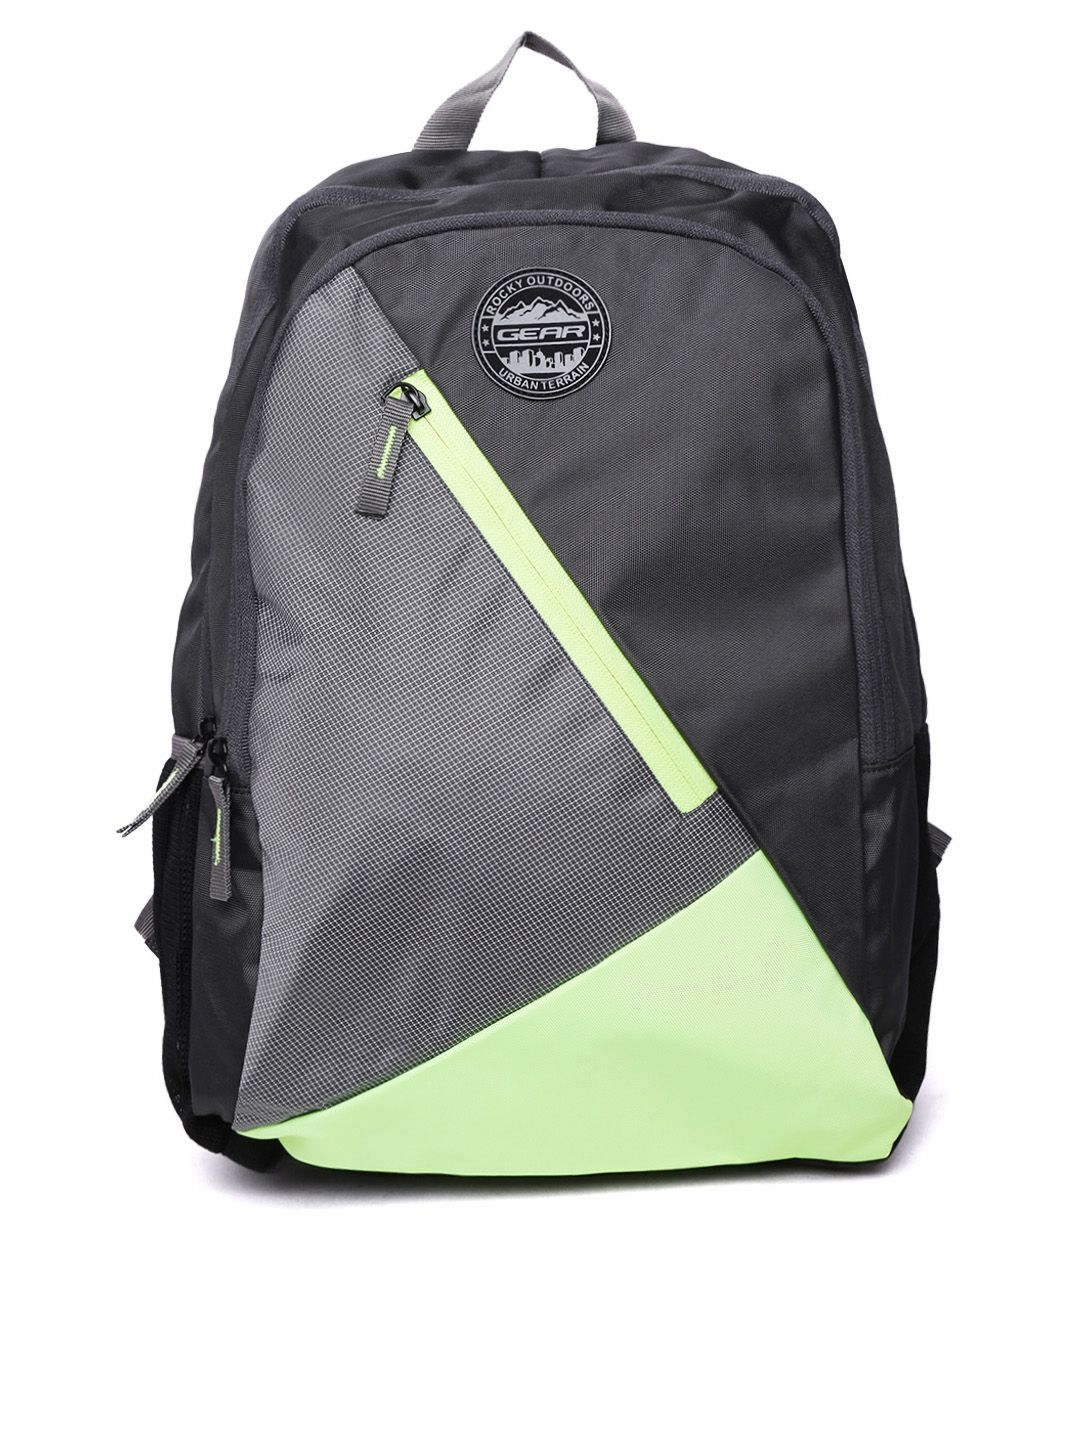 Gear Unisex Grey Colourblocked Backpack Price in India